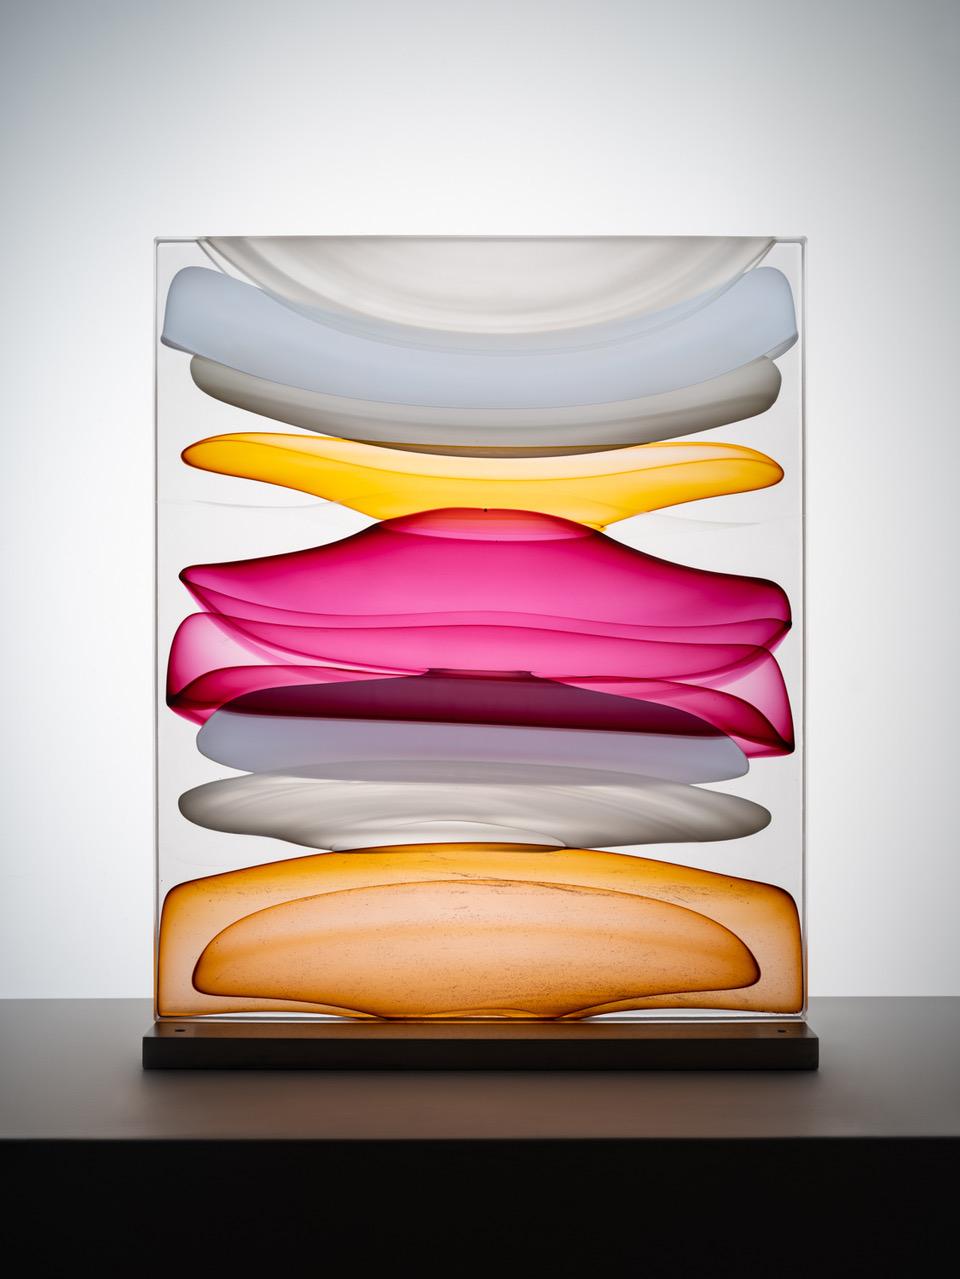 "Etherial Infusion Block in Ivory, White, Amber and Pinks", Glass, Steel - Sculpture by Jamie Harris